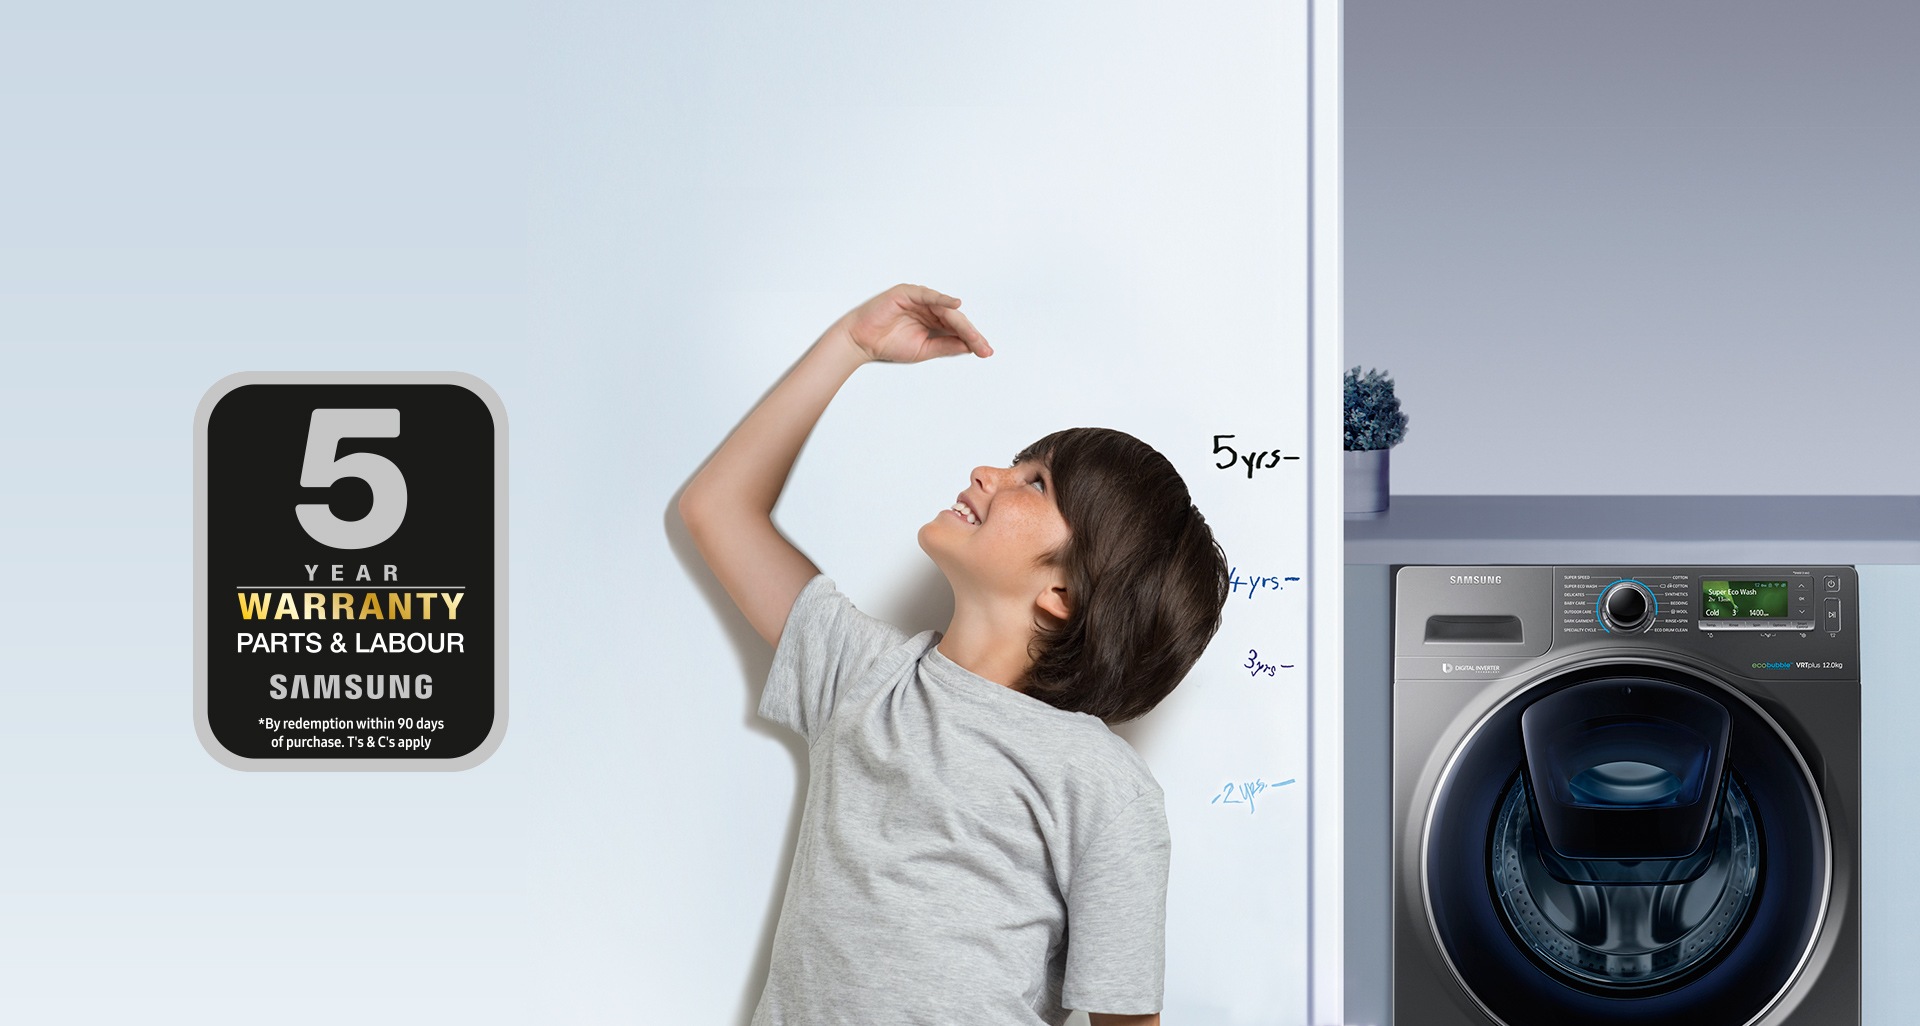 Home Appliances: Appliances for your Home | Samsung UK